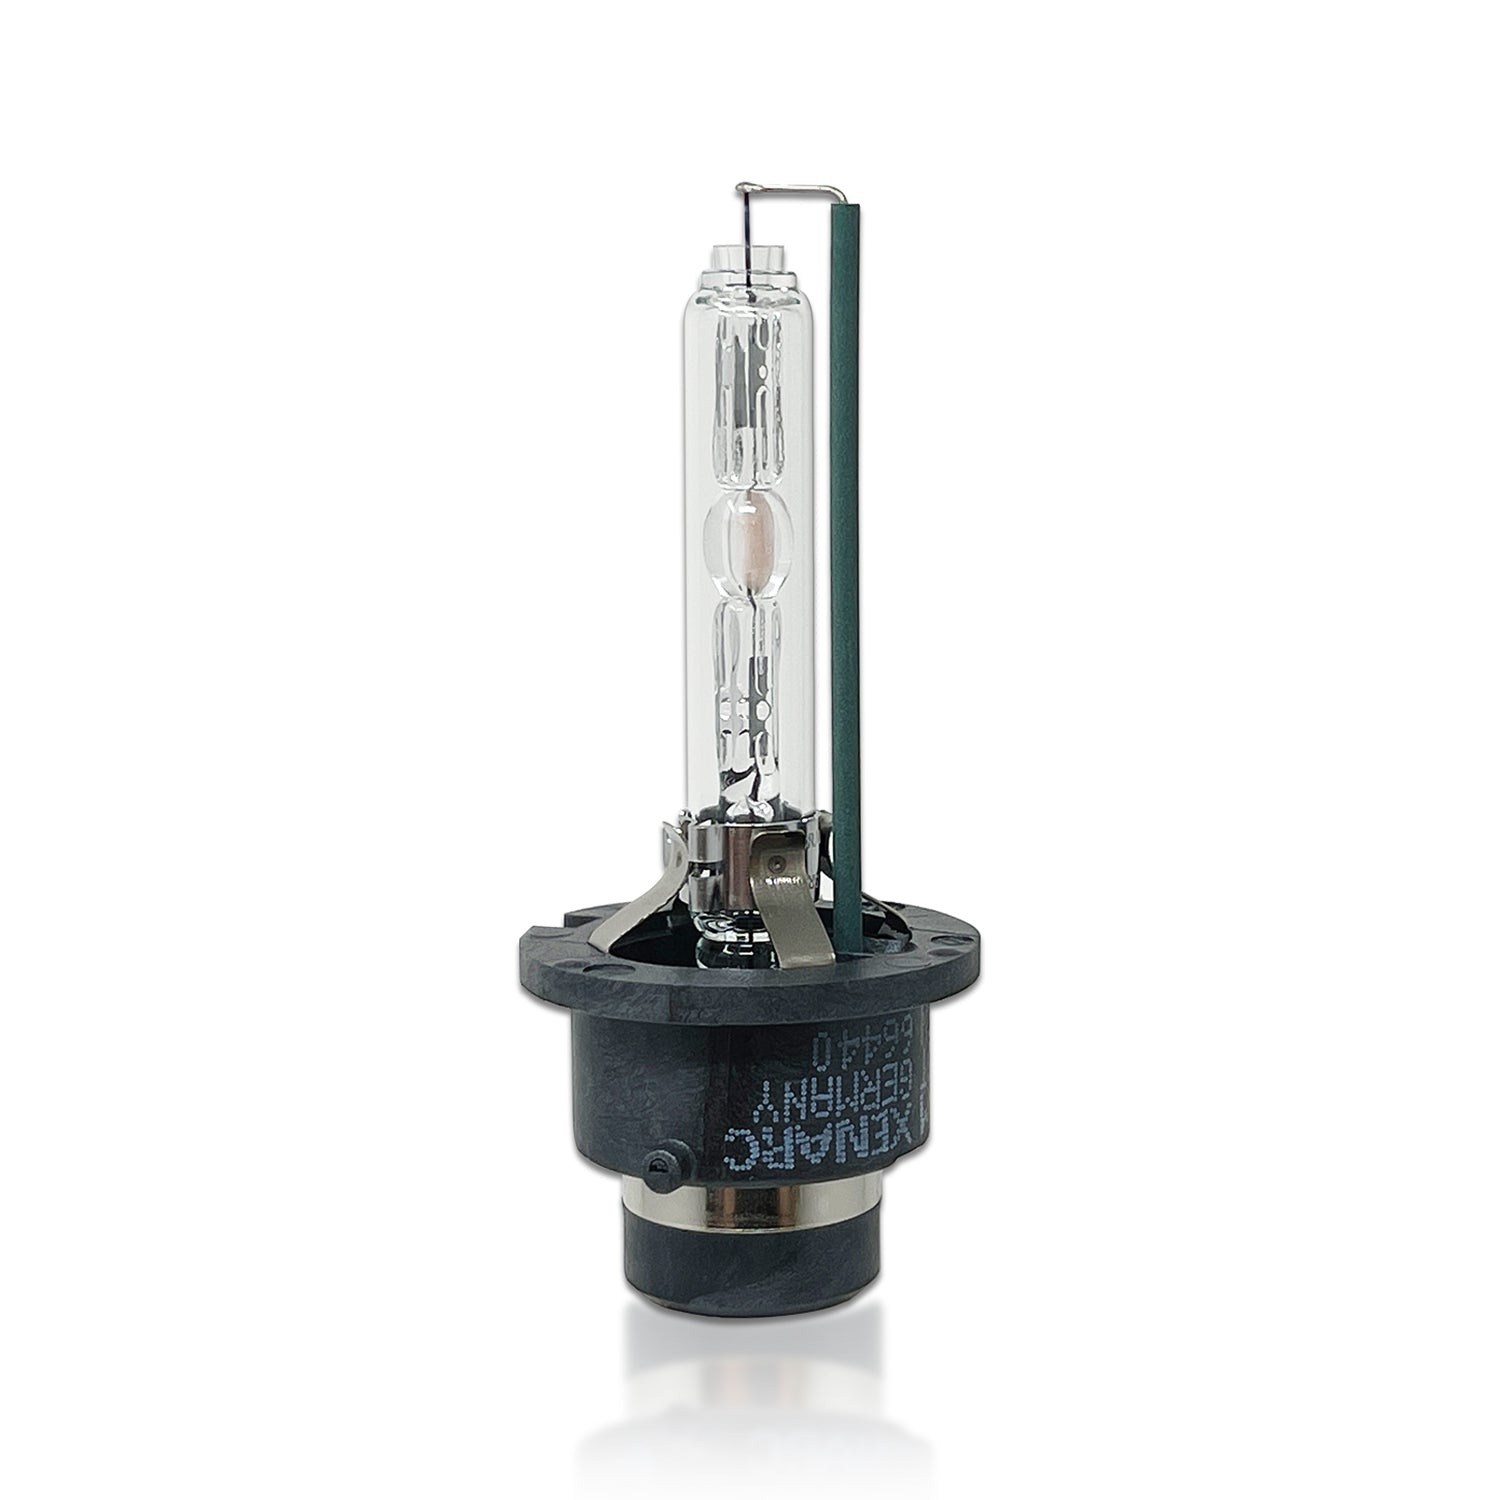 Buy OSRAM HID and Halogen bulbs with free shipping!